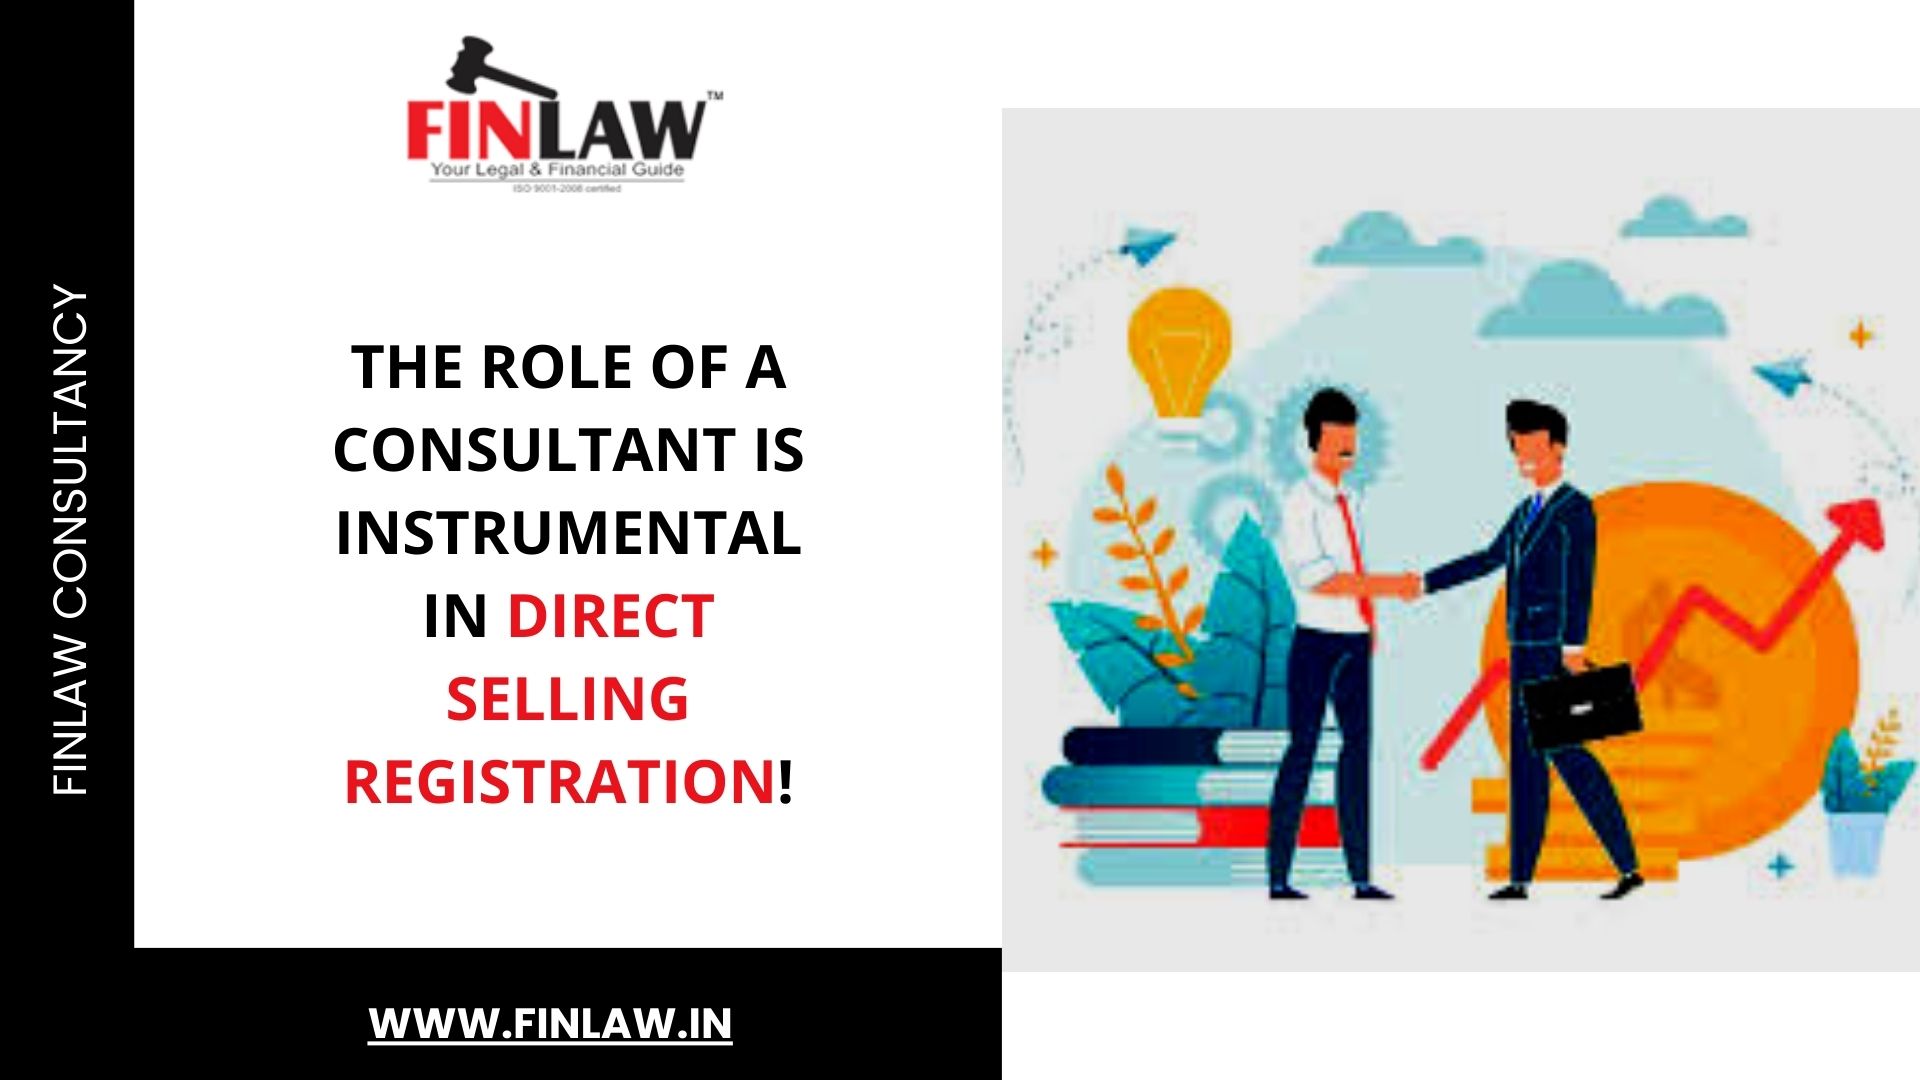 The role of a consultant is instrumental in direct selling registration!